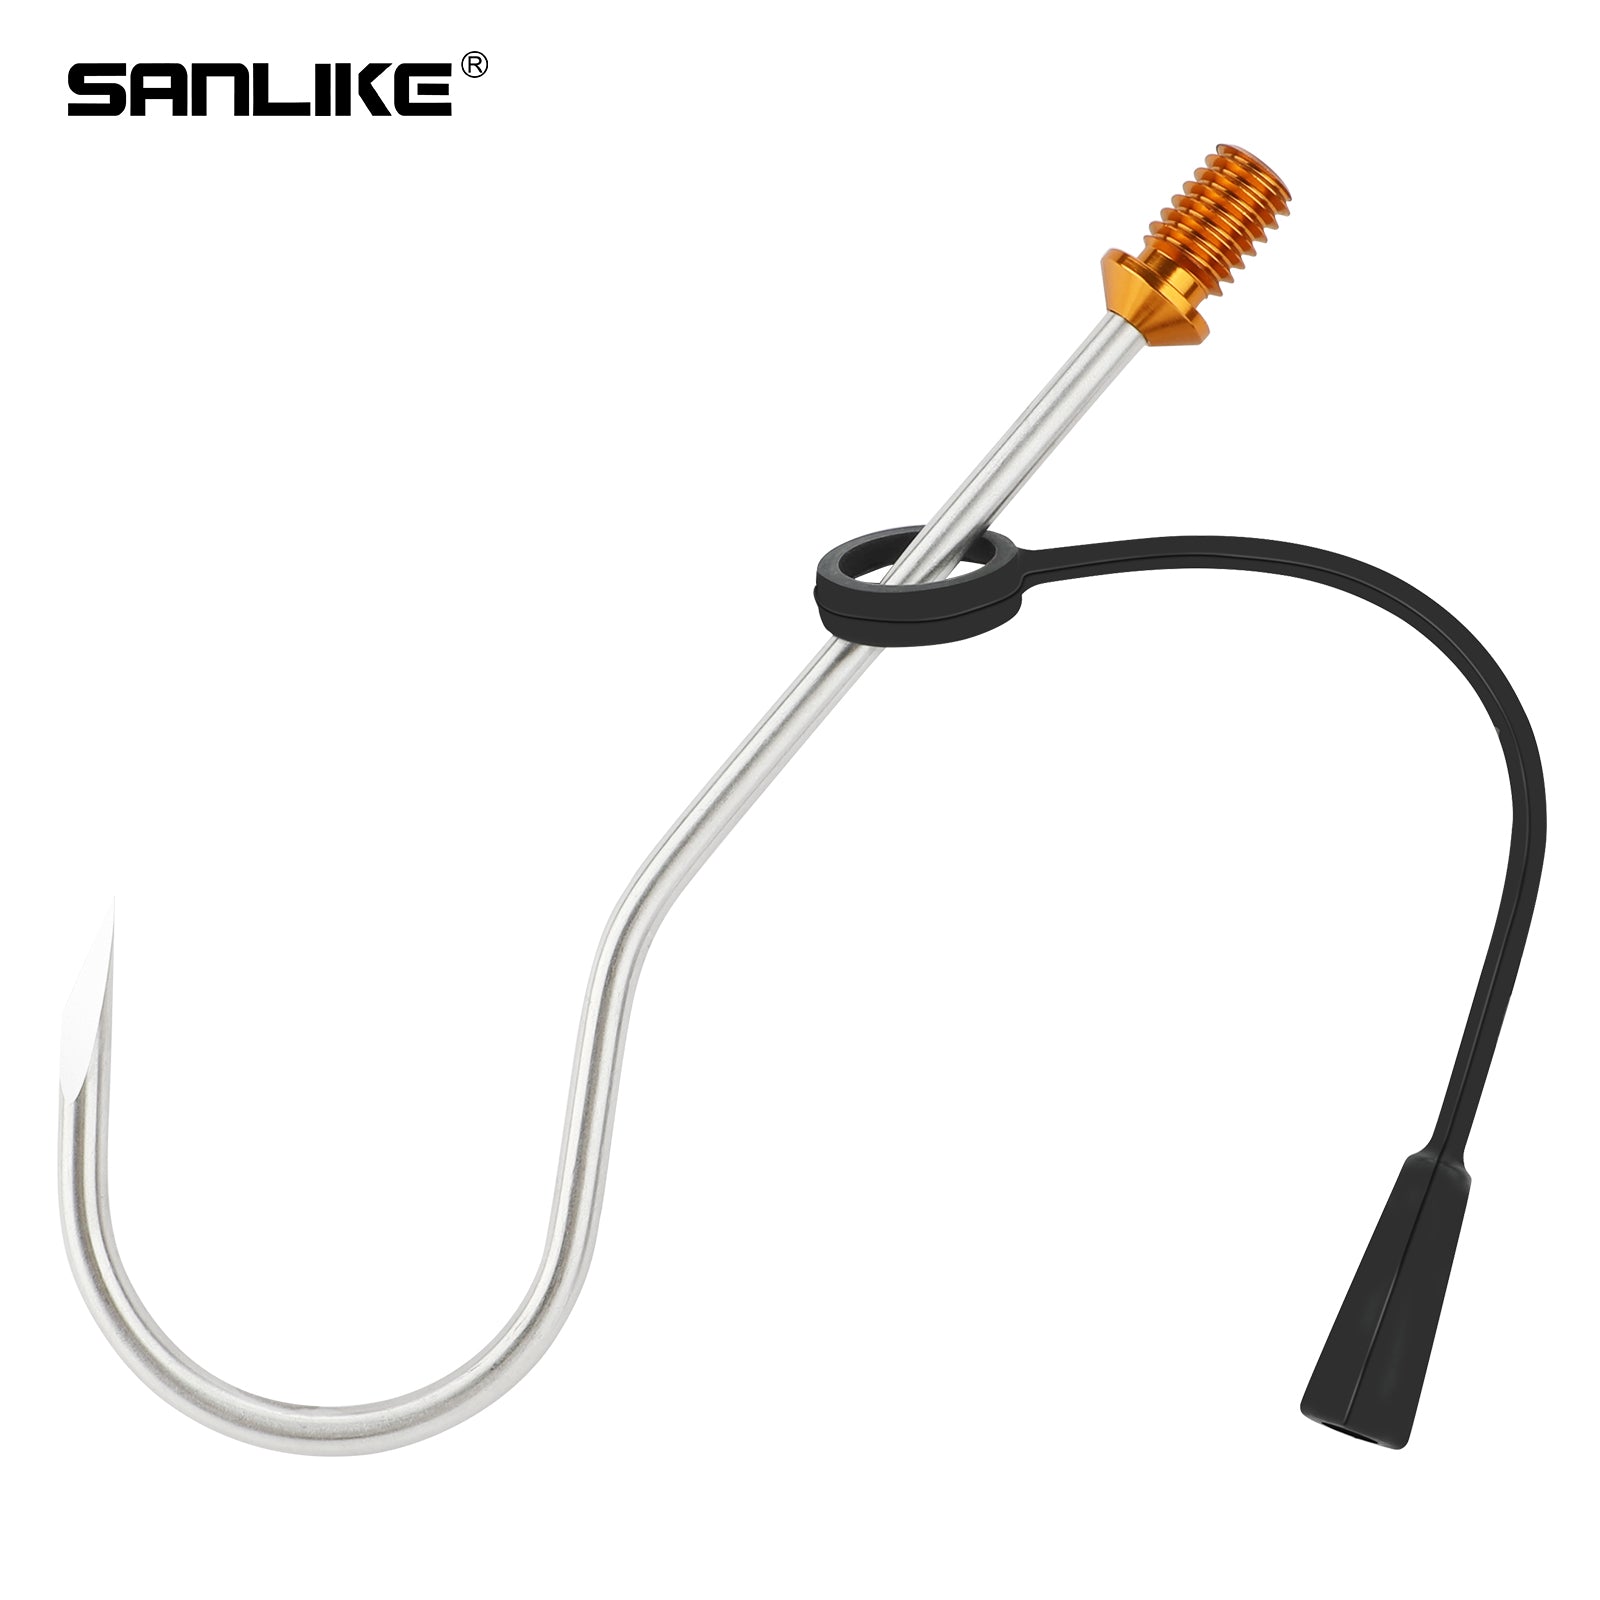 SANLIKE Fishing Hook 1/2 UNC Stainless Steel Fishing Gaff for